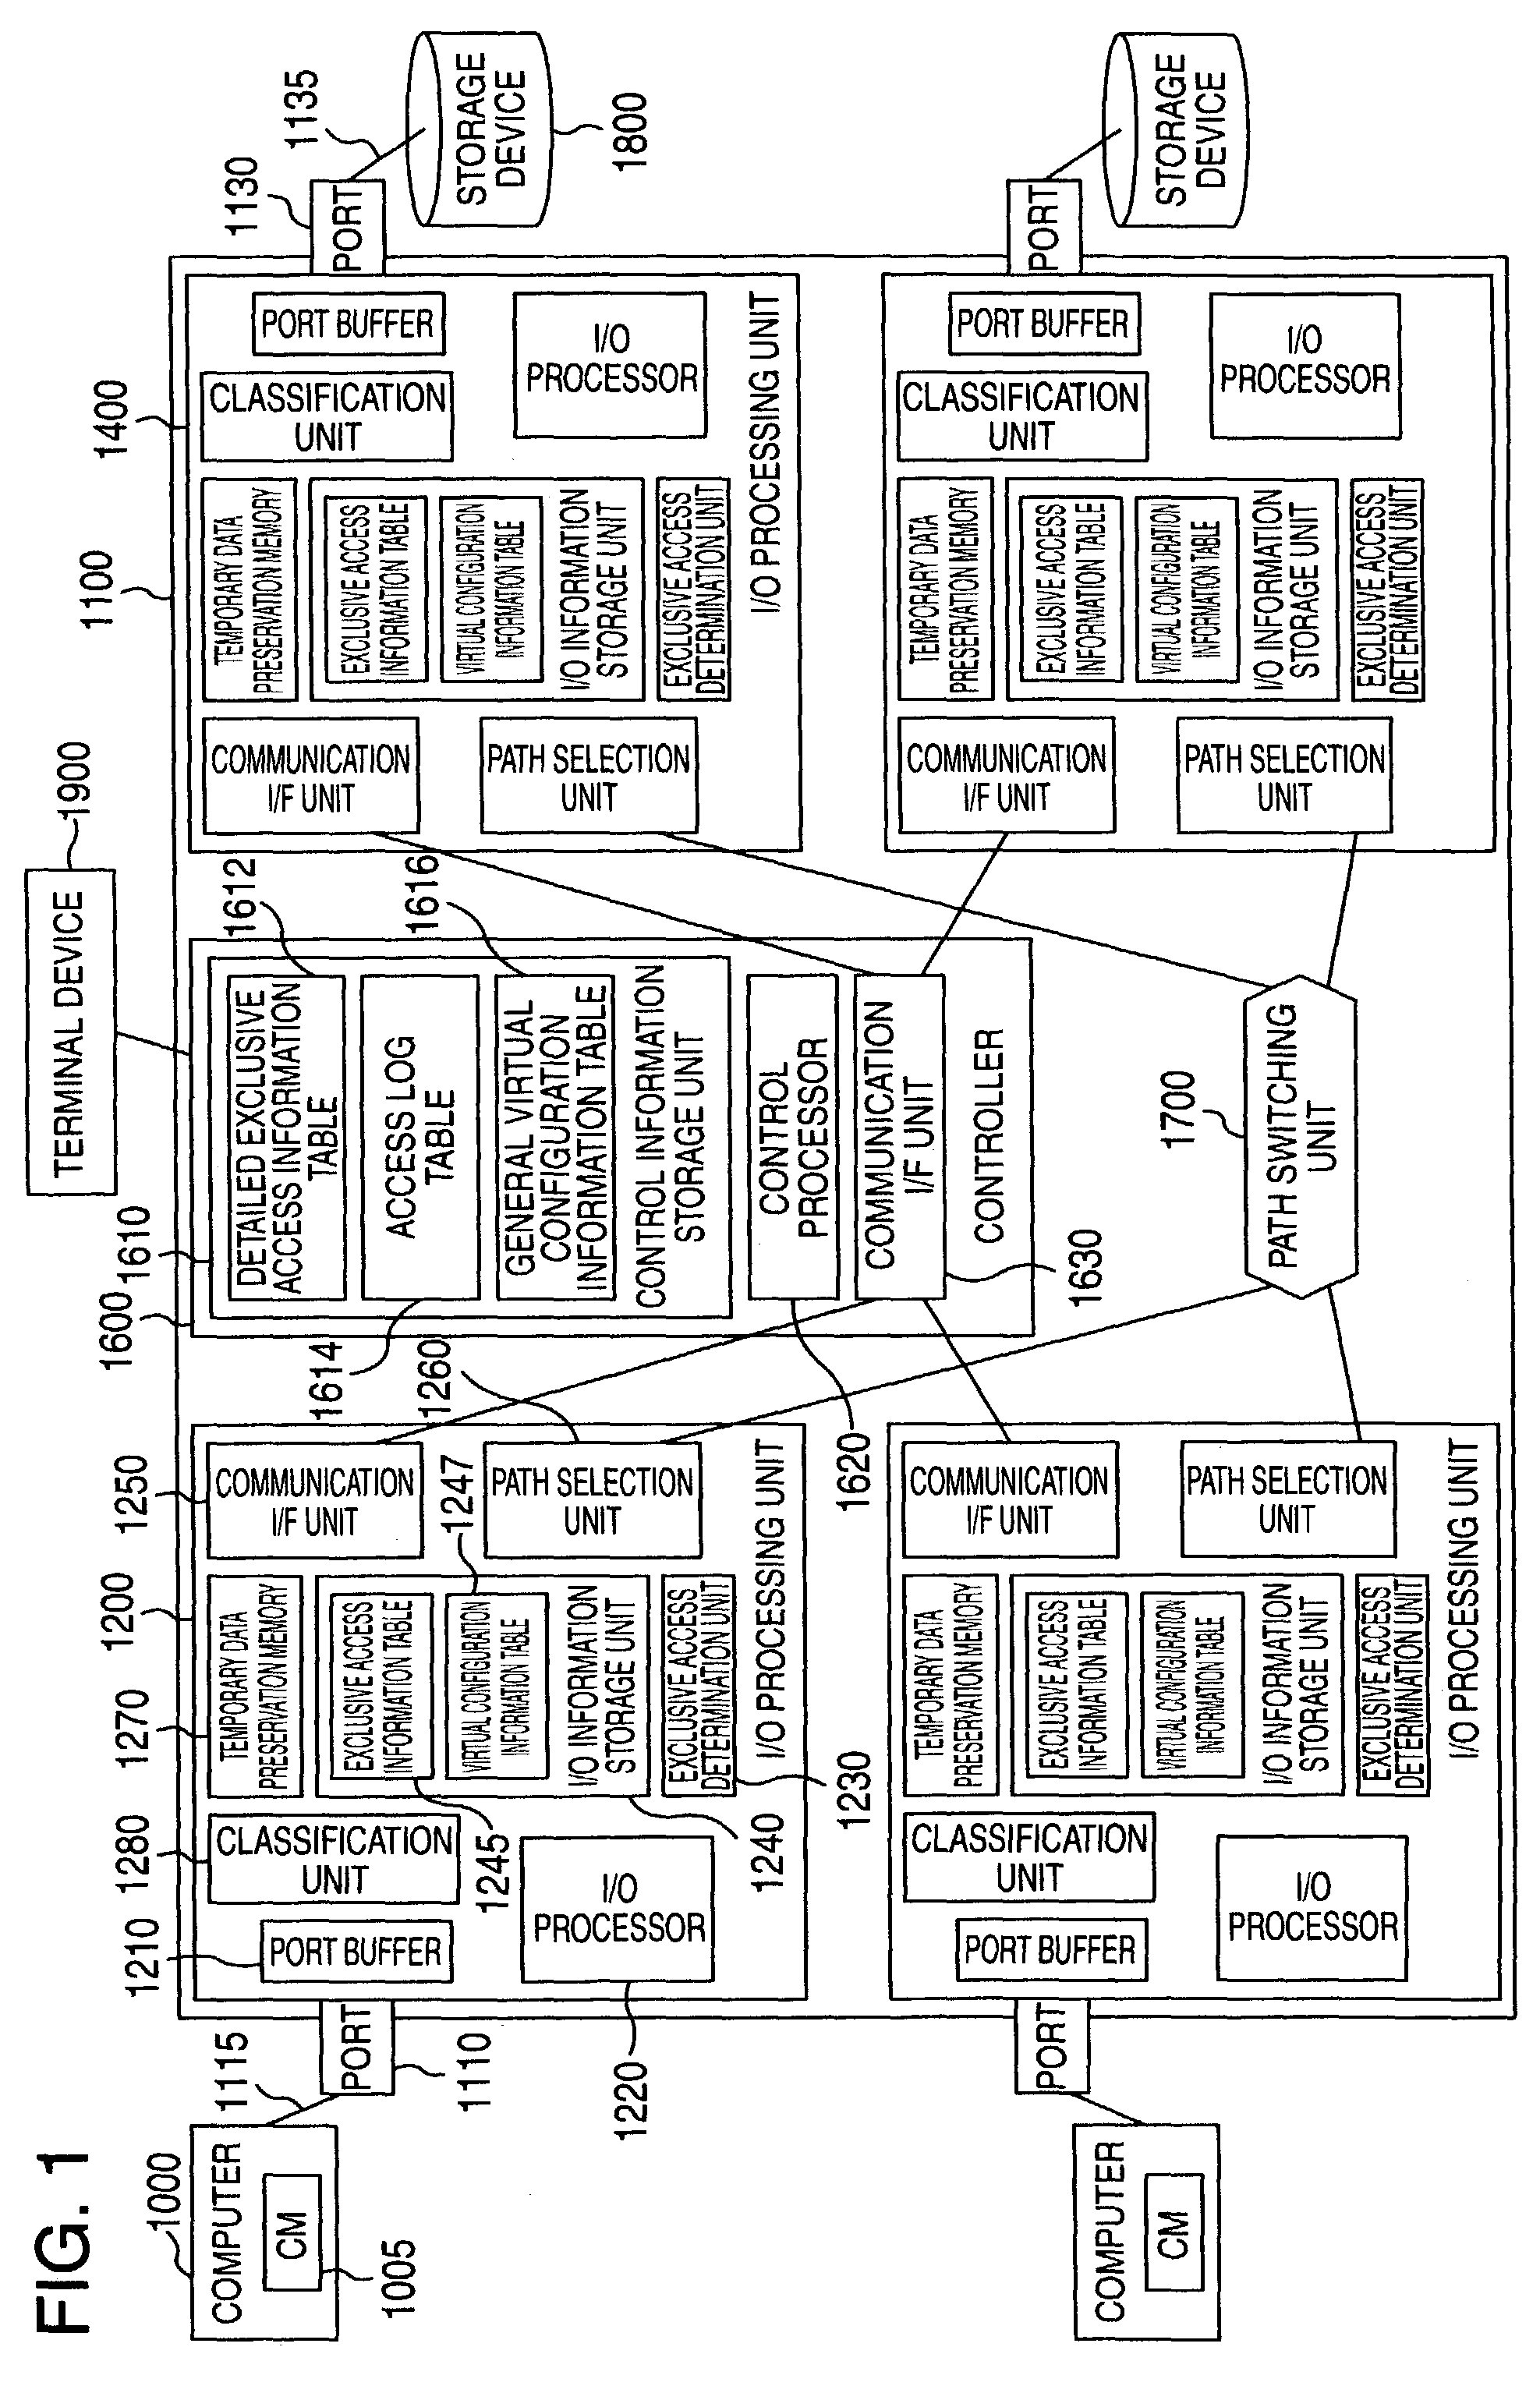 Exclusive access control apparatus and method